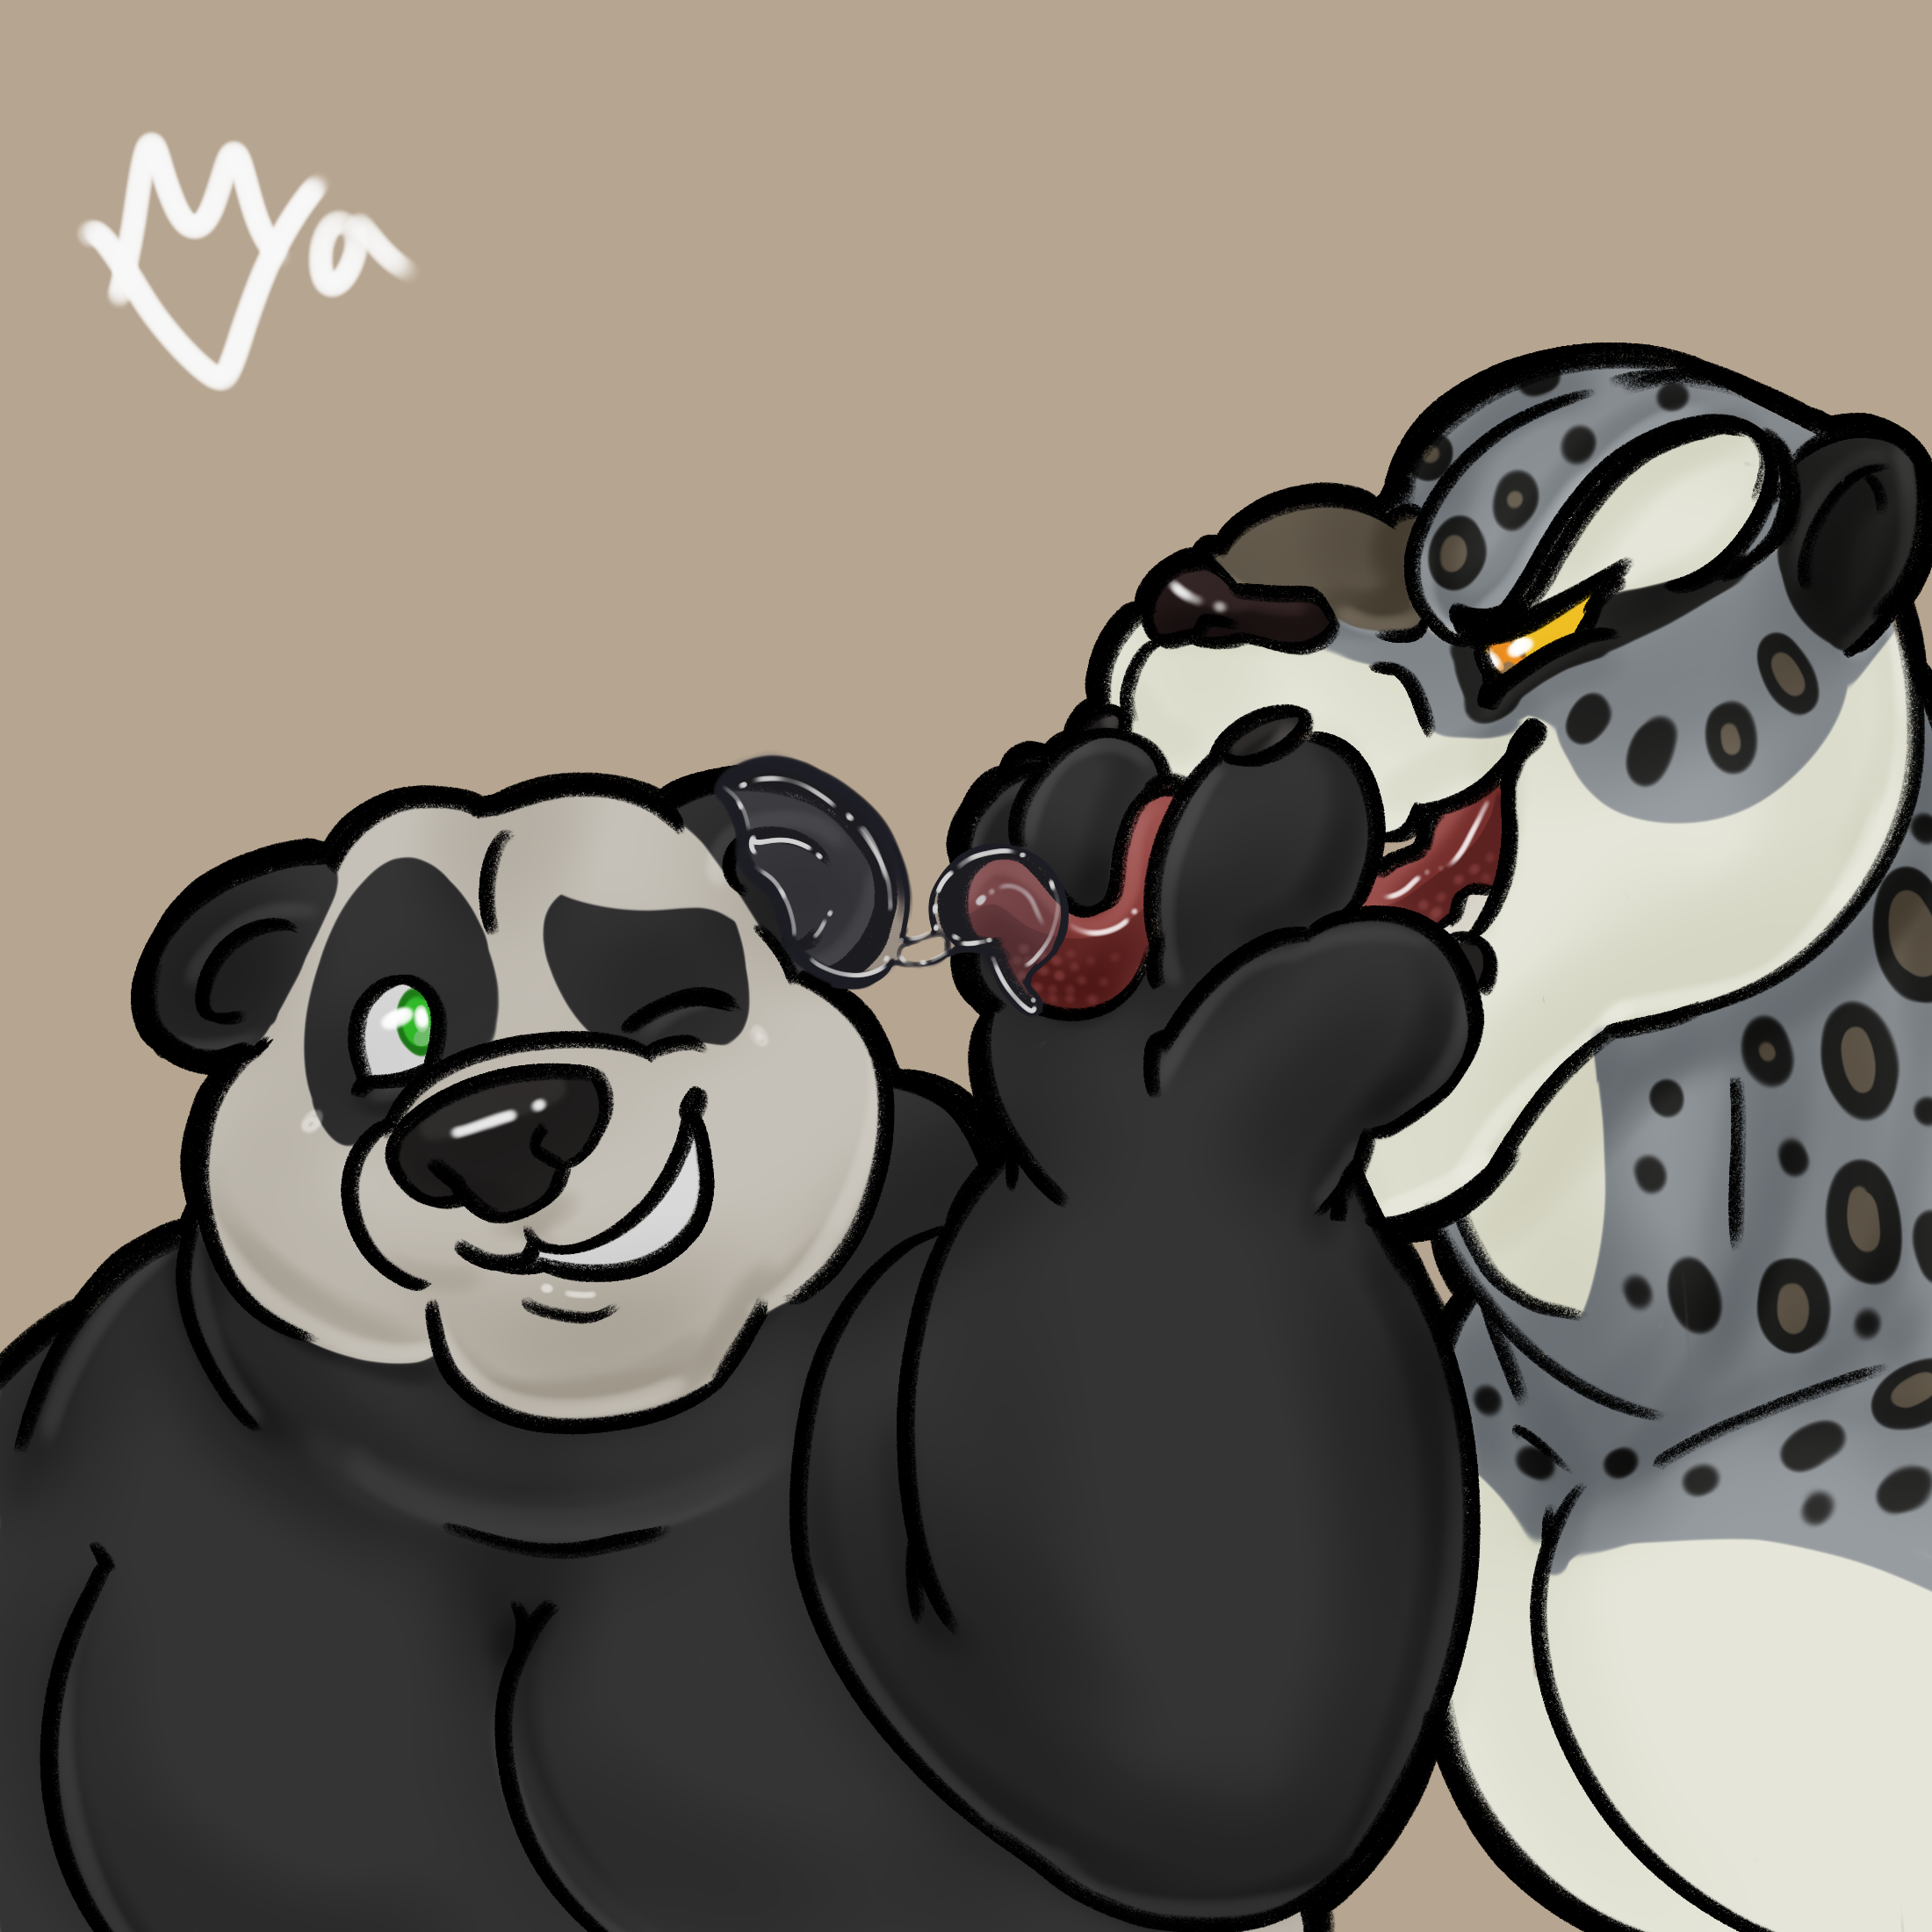 Po and Tai lung shenanigans by Maltus Vandrel 